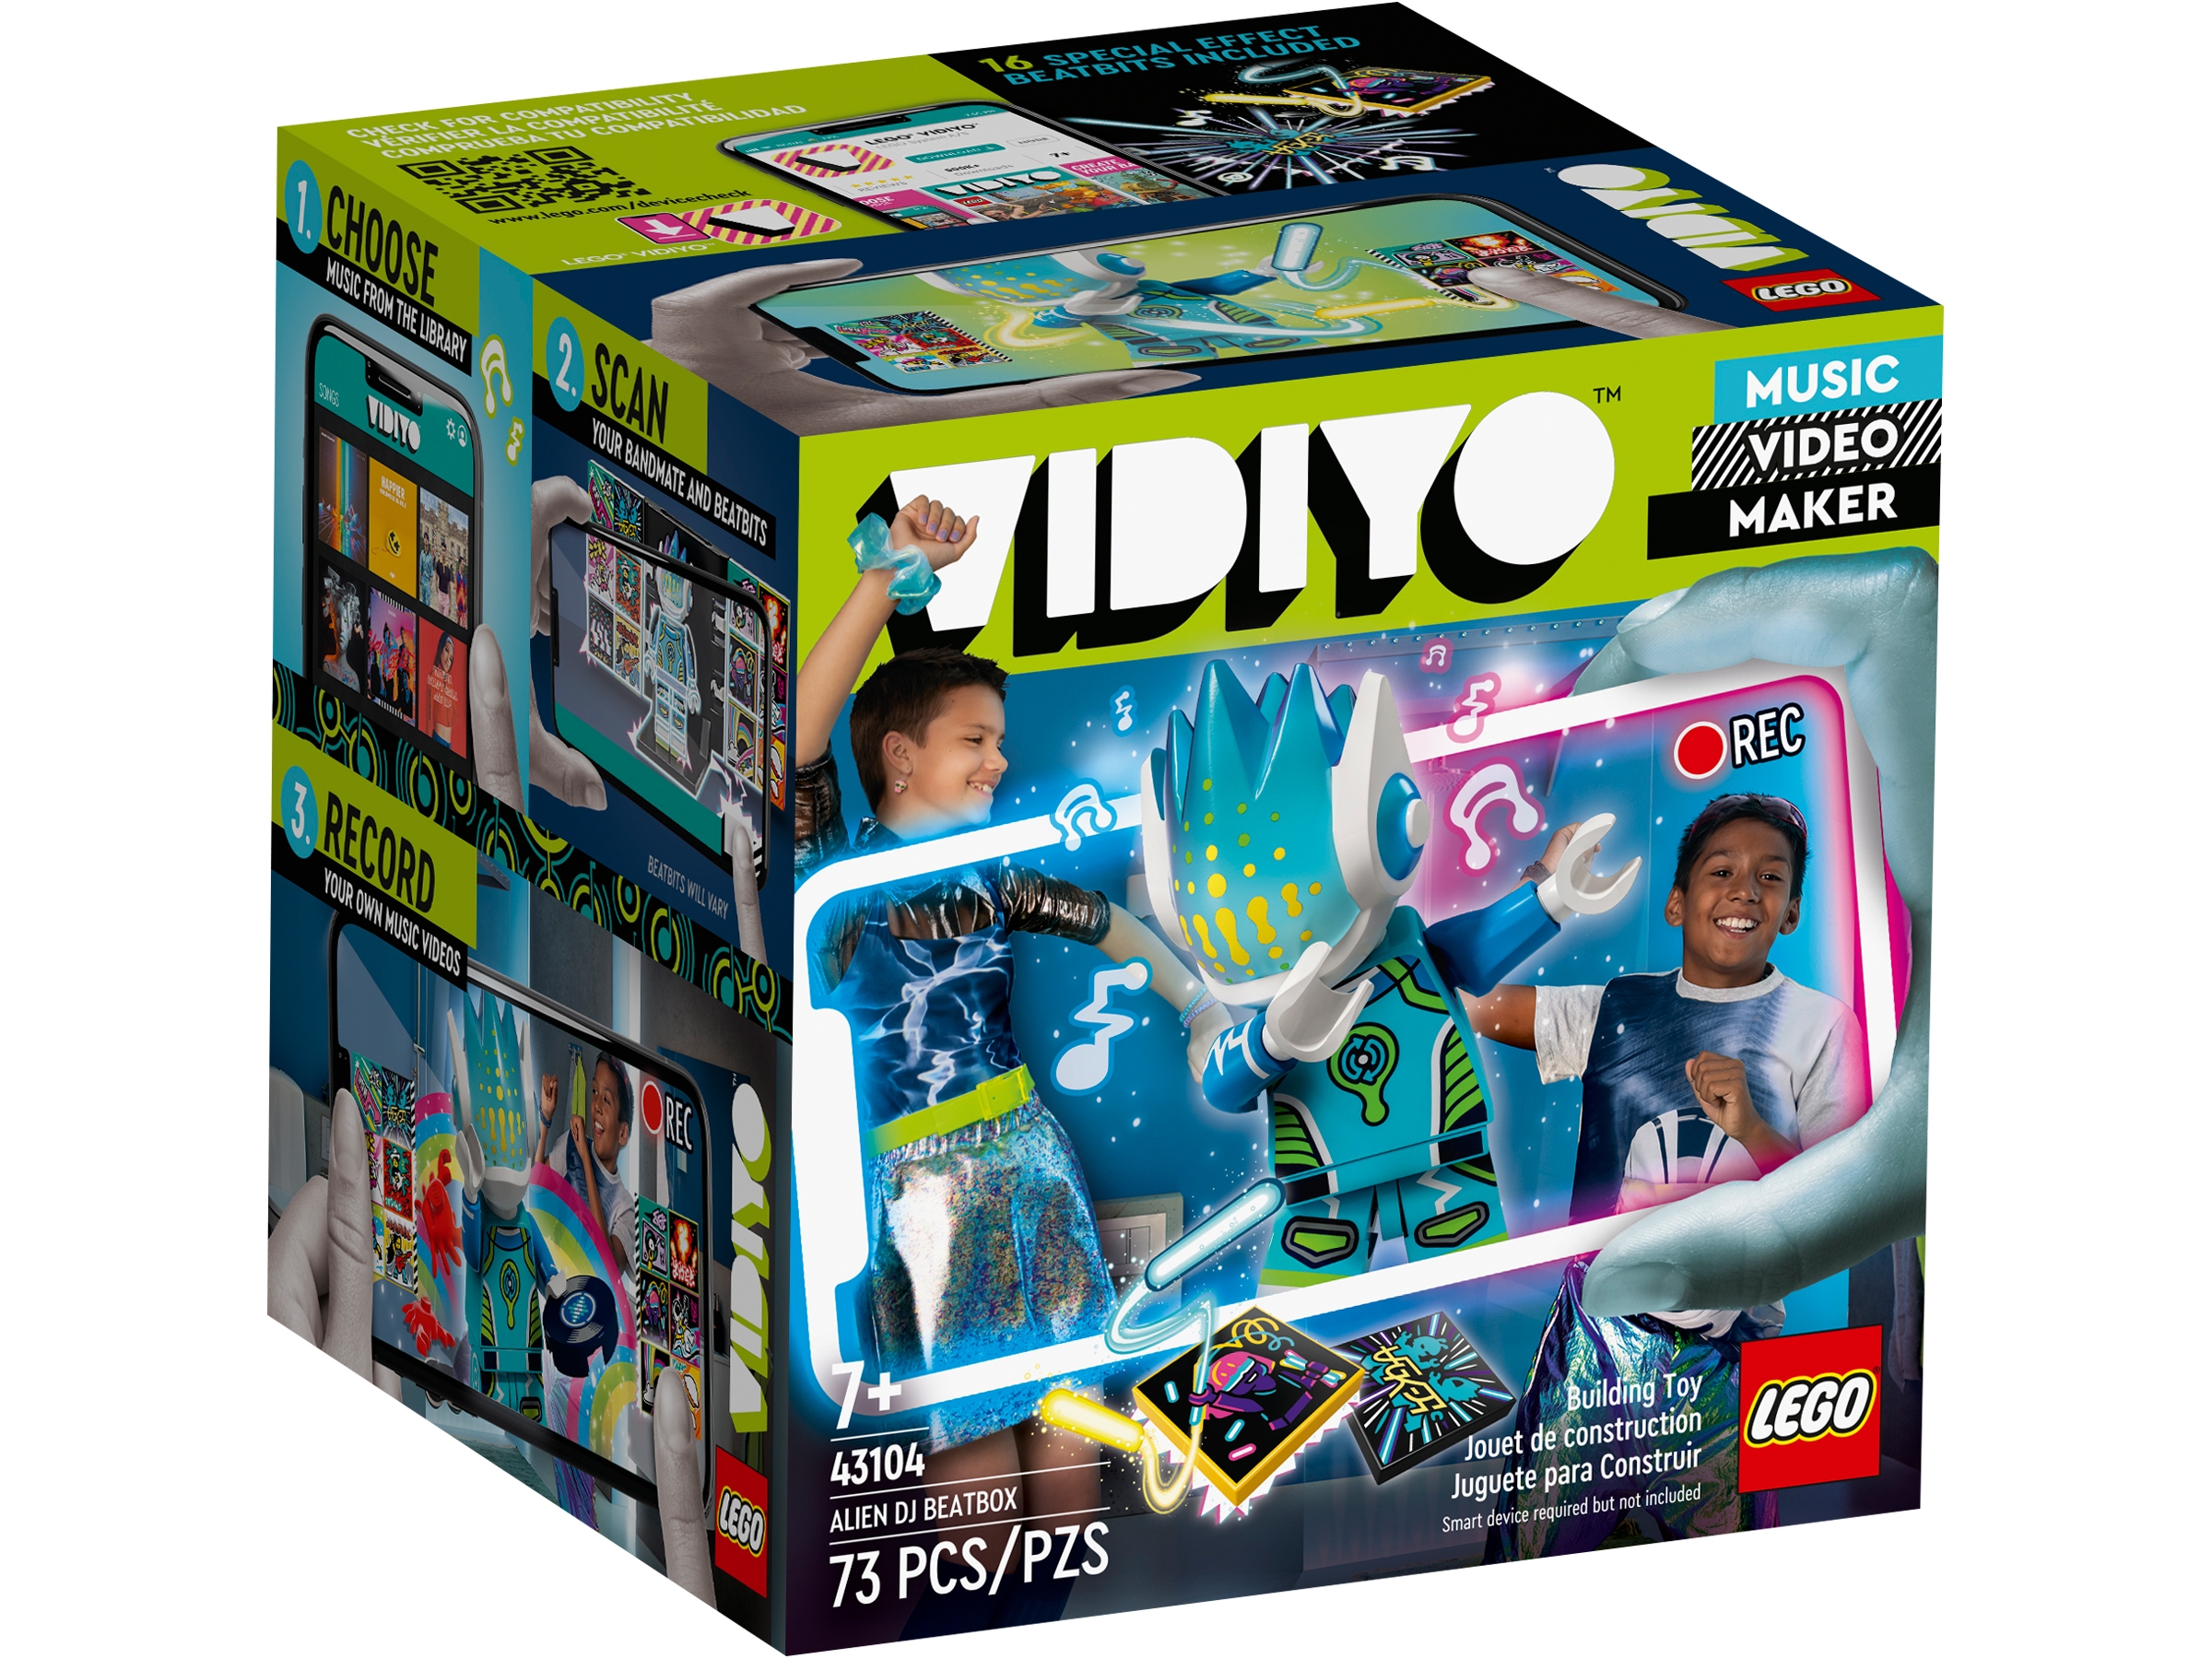 New 2021 73 Pieces LEGO VIDIYO Alien DJ Beatbox 43104 Building Kit with Minifigure; Creative Kids Will Love Producing Music Videos Full of Songs Dance Moves and Special Effects 